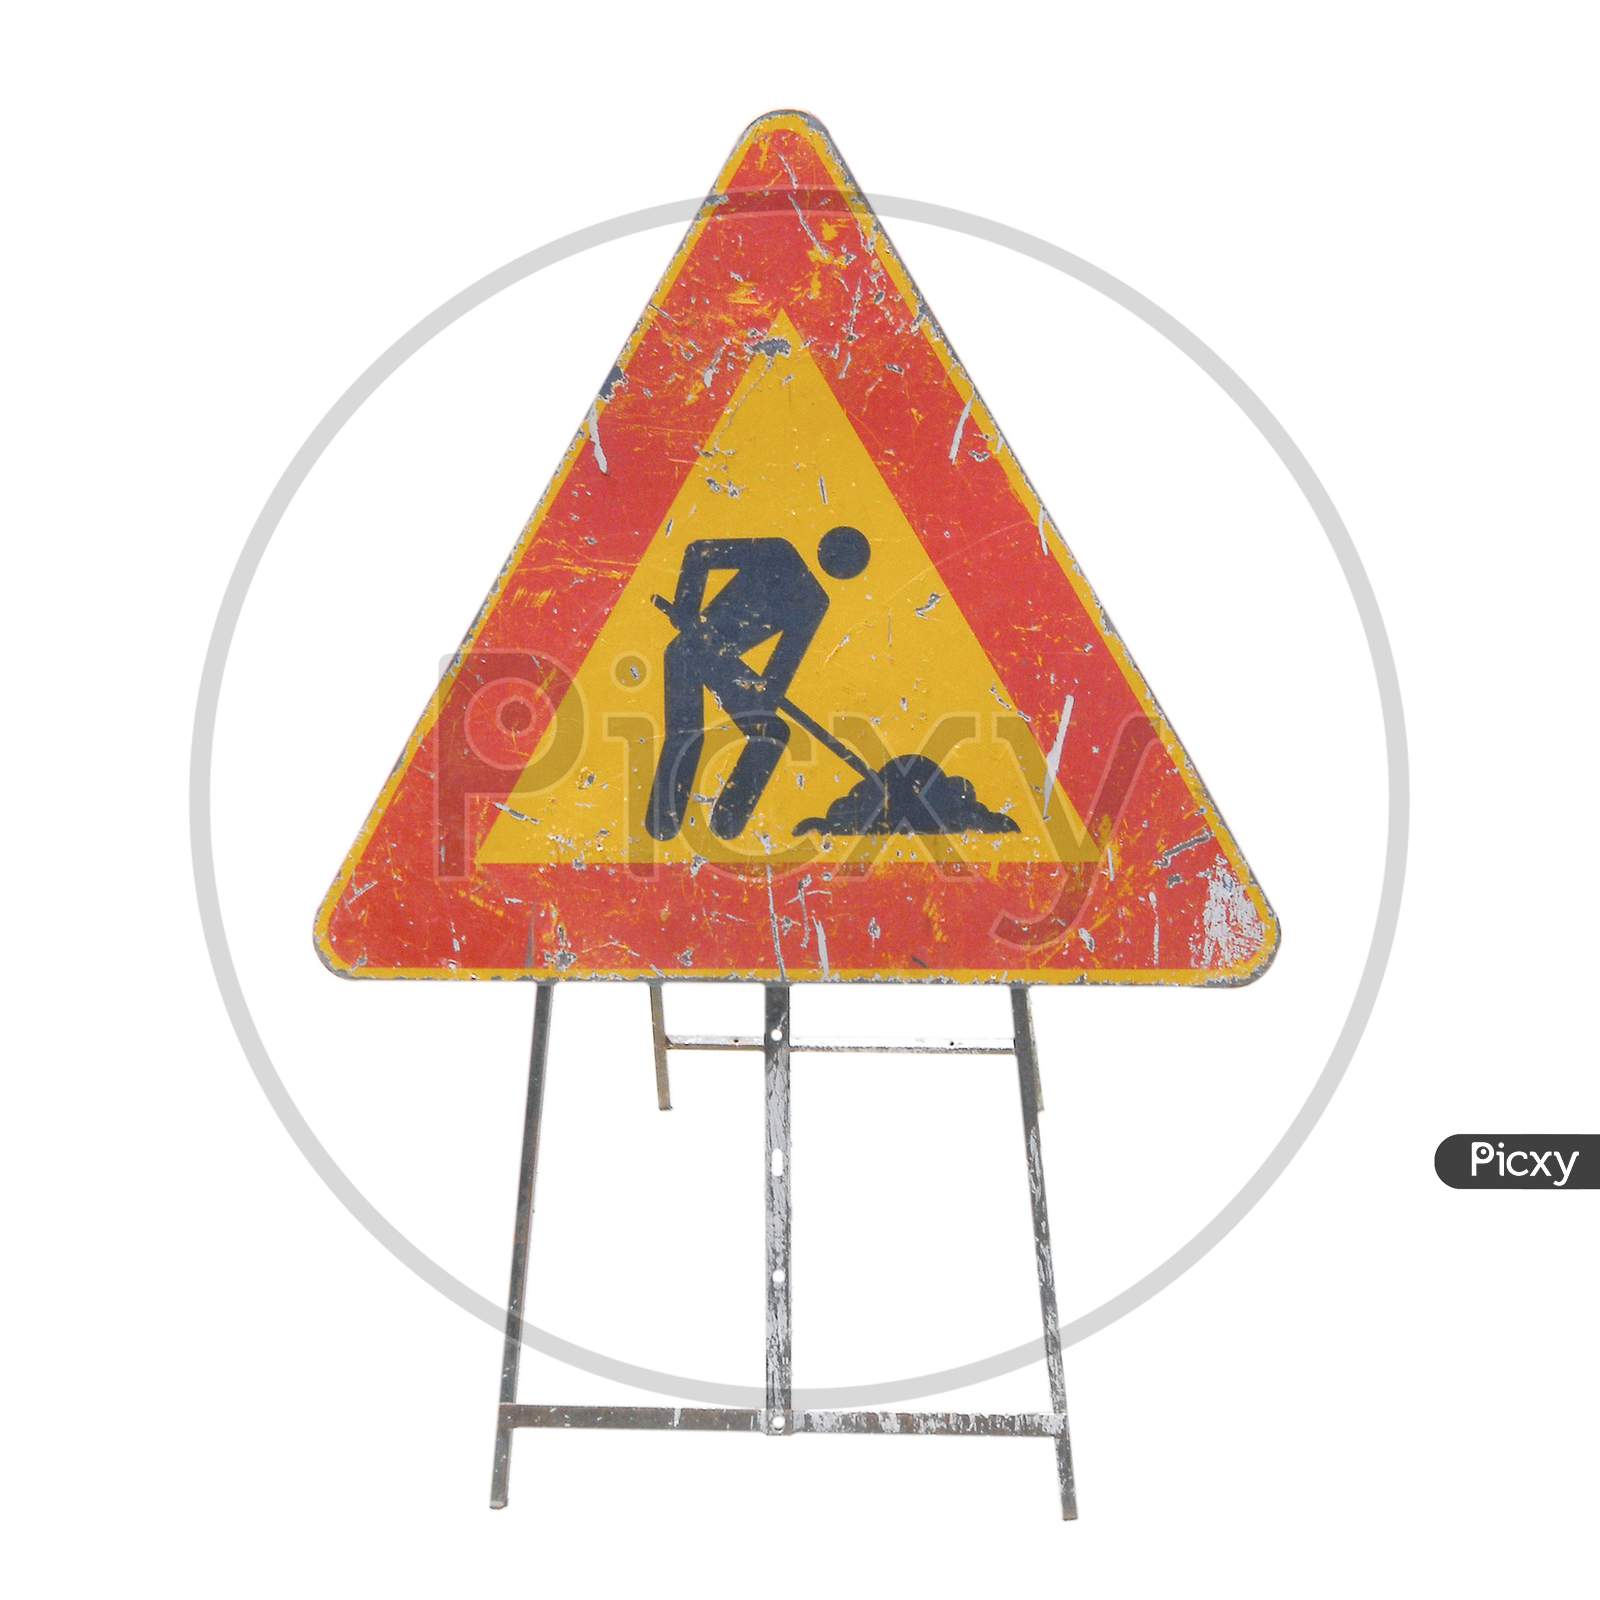 Roads Works Sign